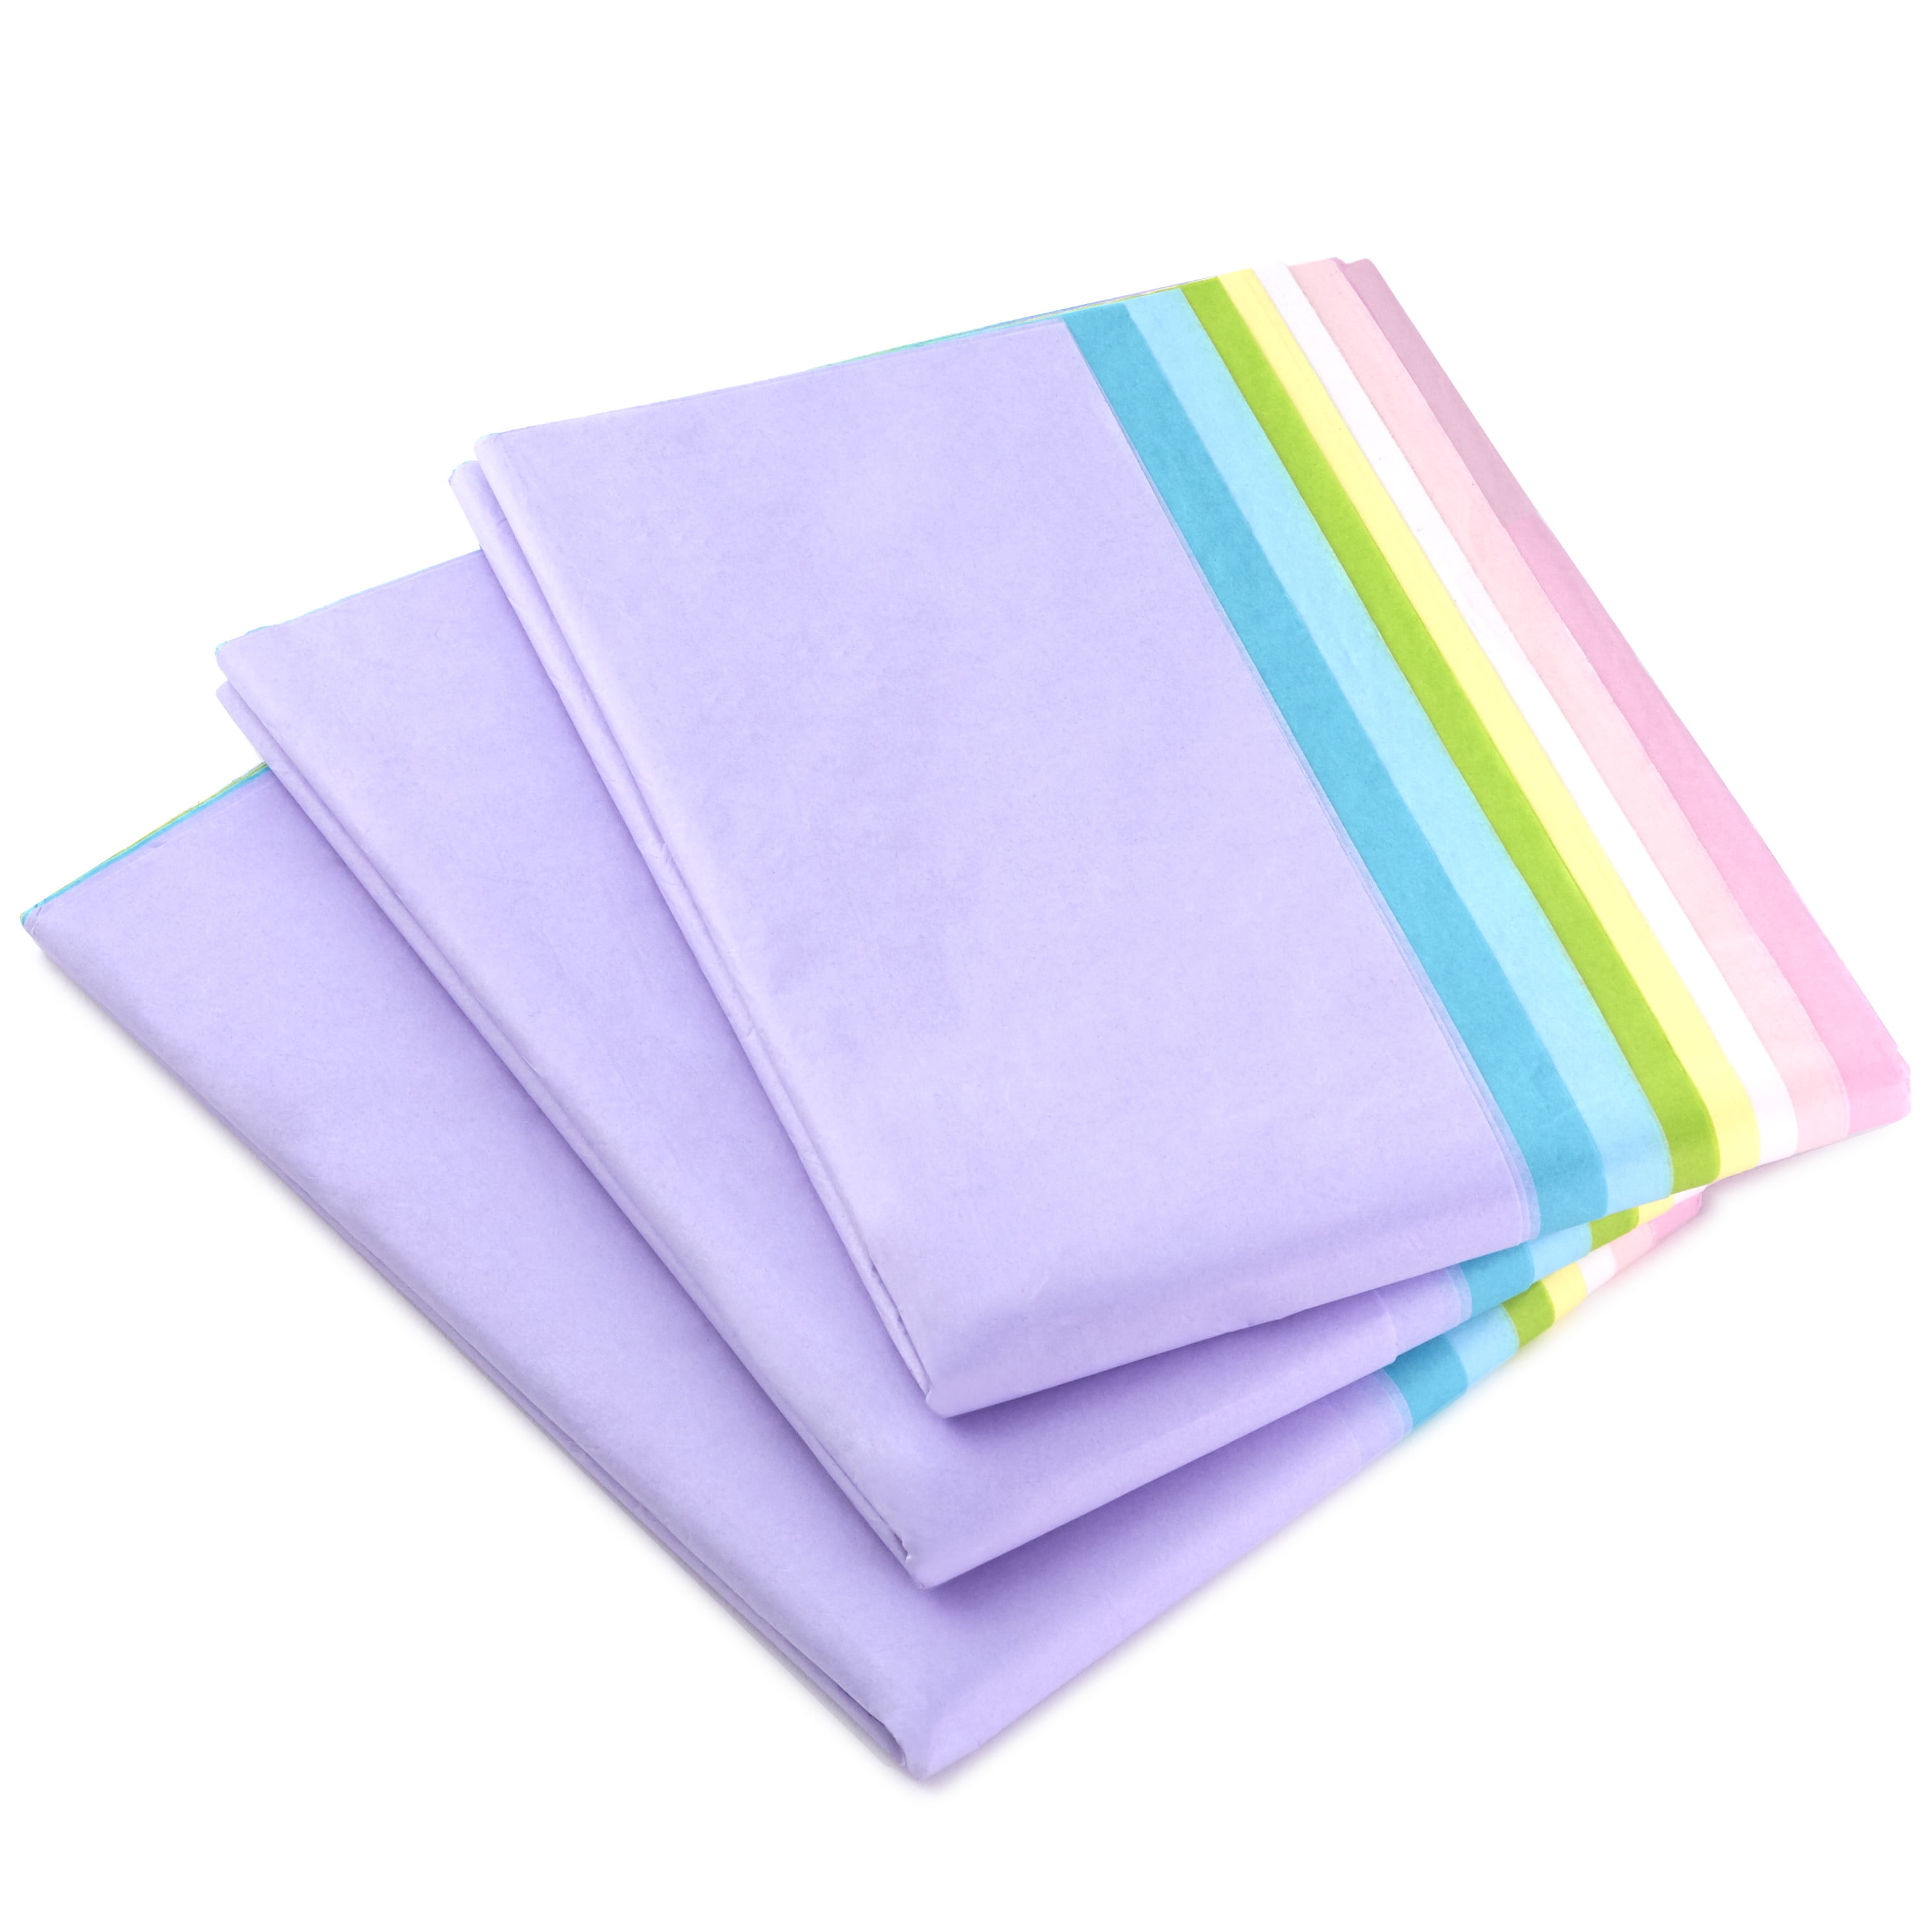 Hallmark Tissue Paper (Pastel Rainbow, 8 Colors) 120 Sheets for Gift Wrap,  Crafts, DIY Paper Flowers, Tassel Garland and More 